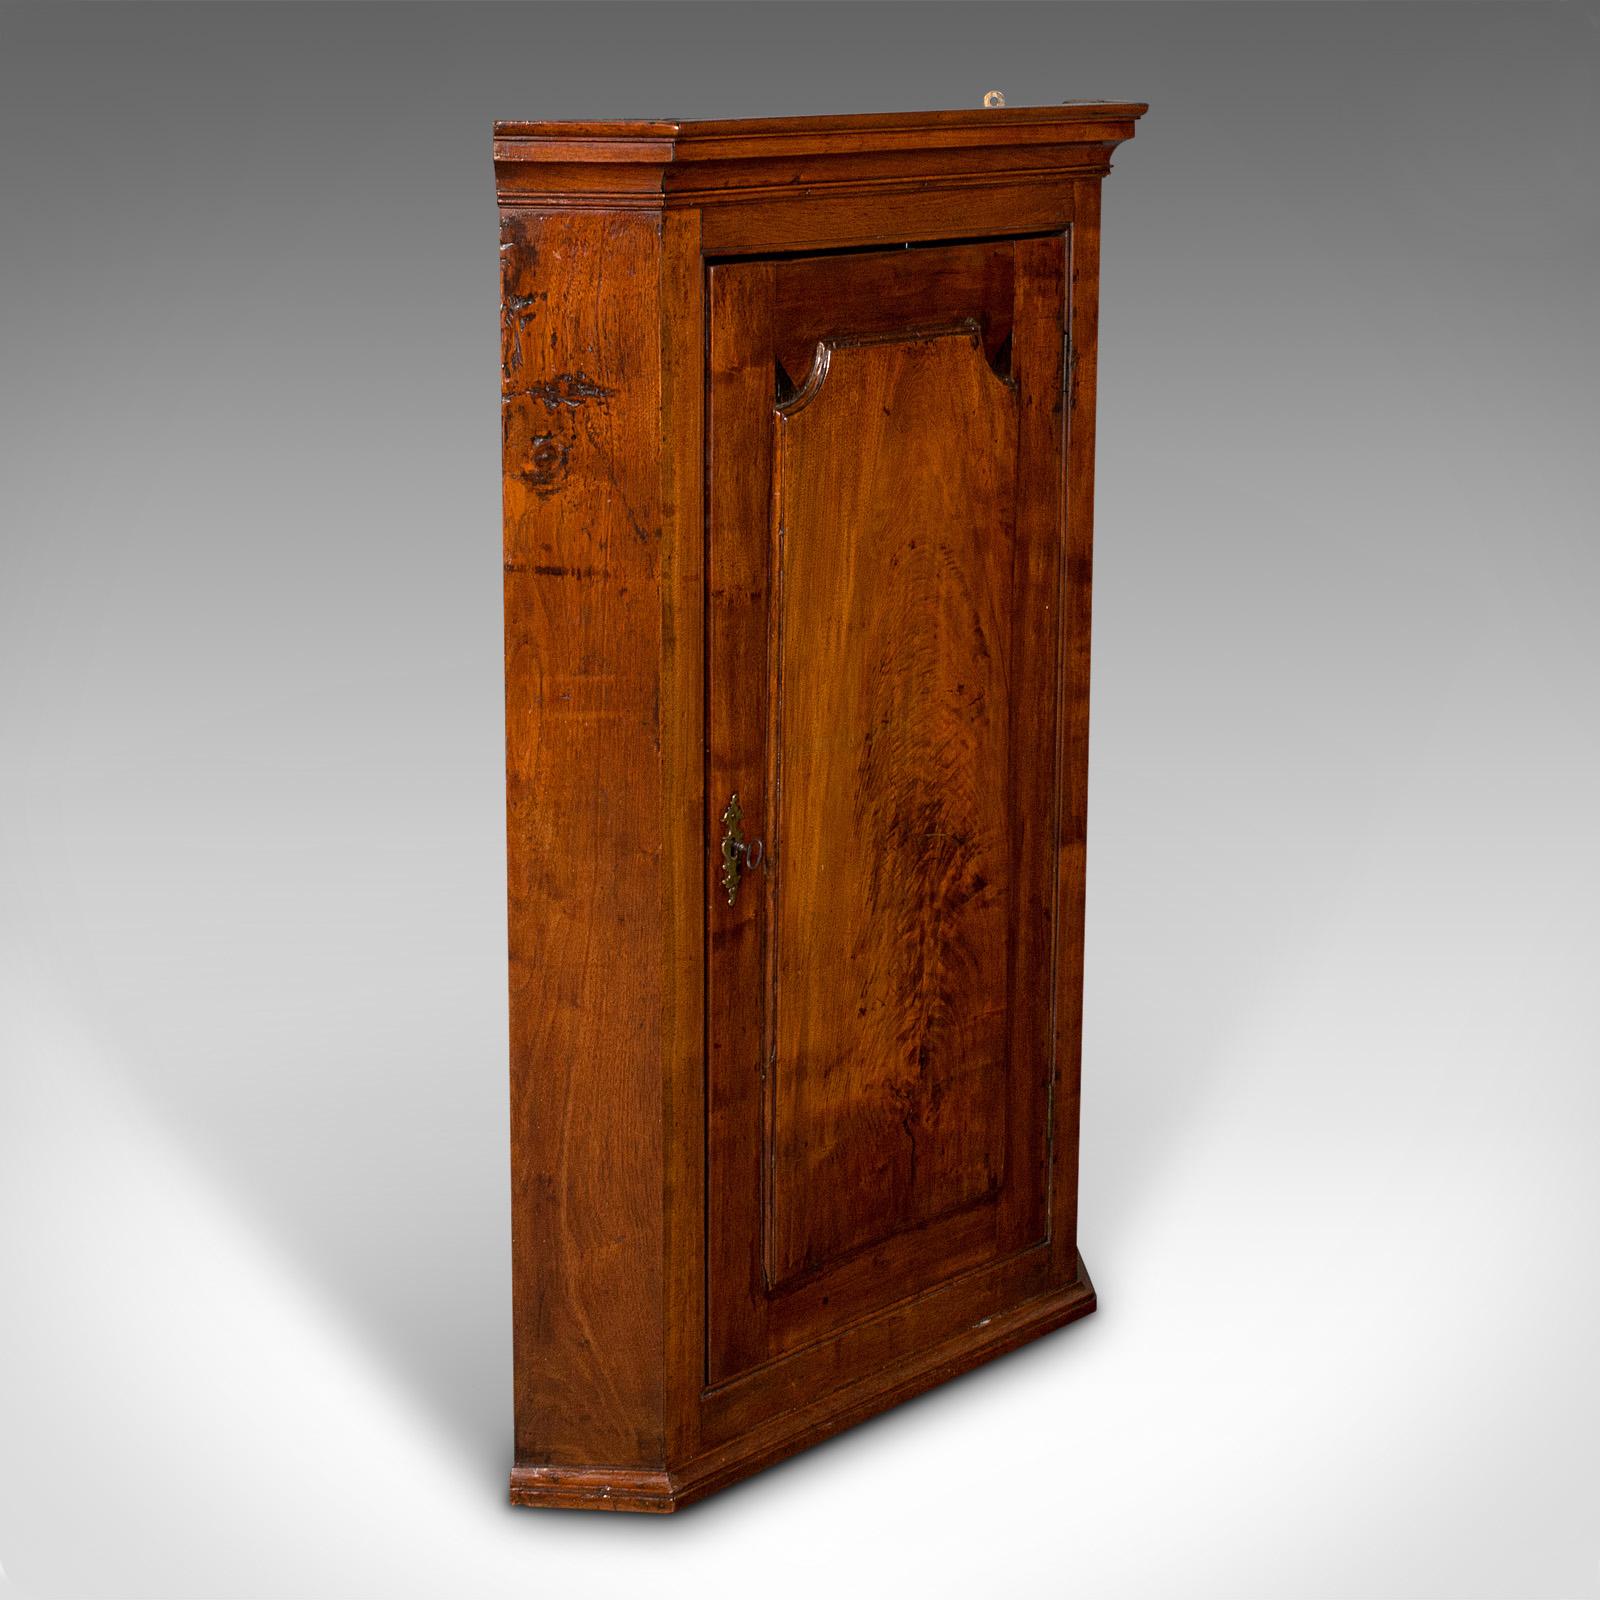 This is an antique corner cabinet. An English, mahogany and fruitwood wall cupboard, dating to the Georgian period, circa 1780.

Appealing Georgian corner cupboard with fine figuring and color
Displays a desirable aged patina and in good order